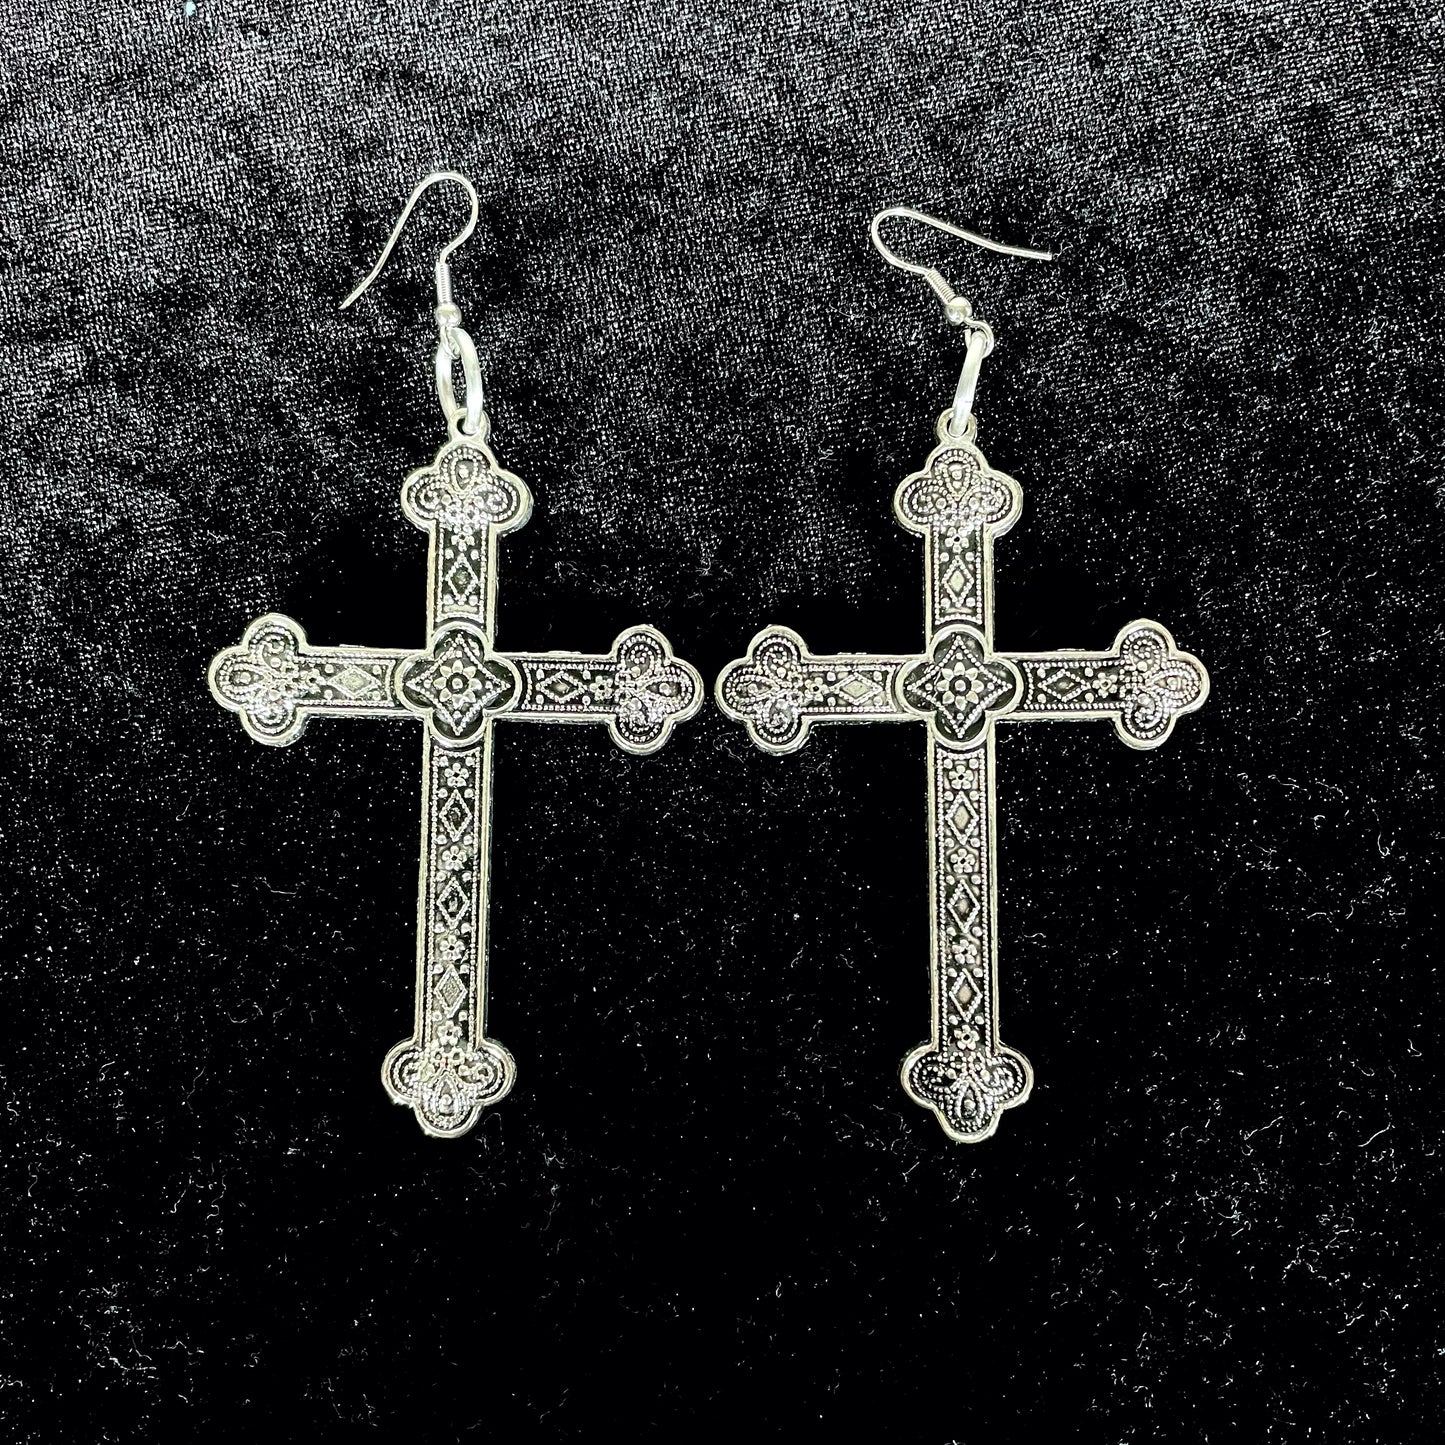 Gothic cross earrings goth tradgoth witch industrial deathrock punk 80's 90's grunge occult 